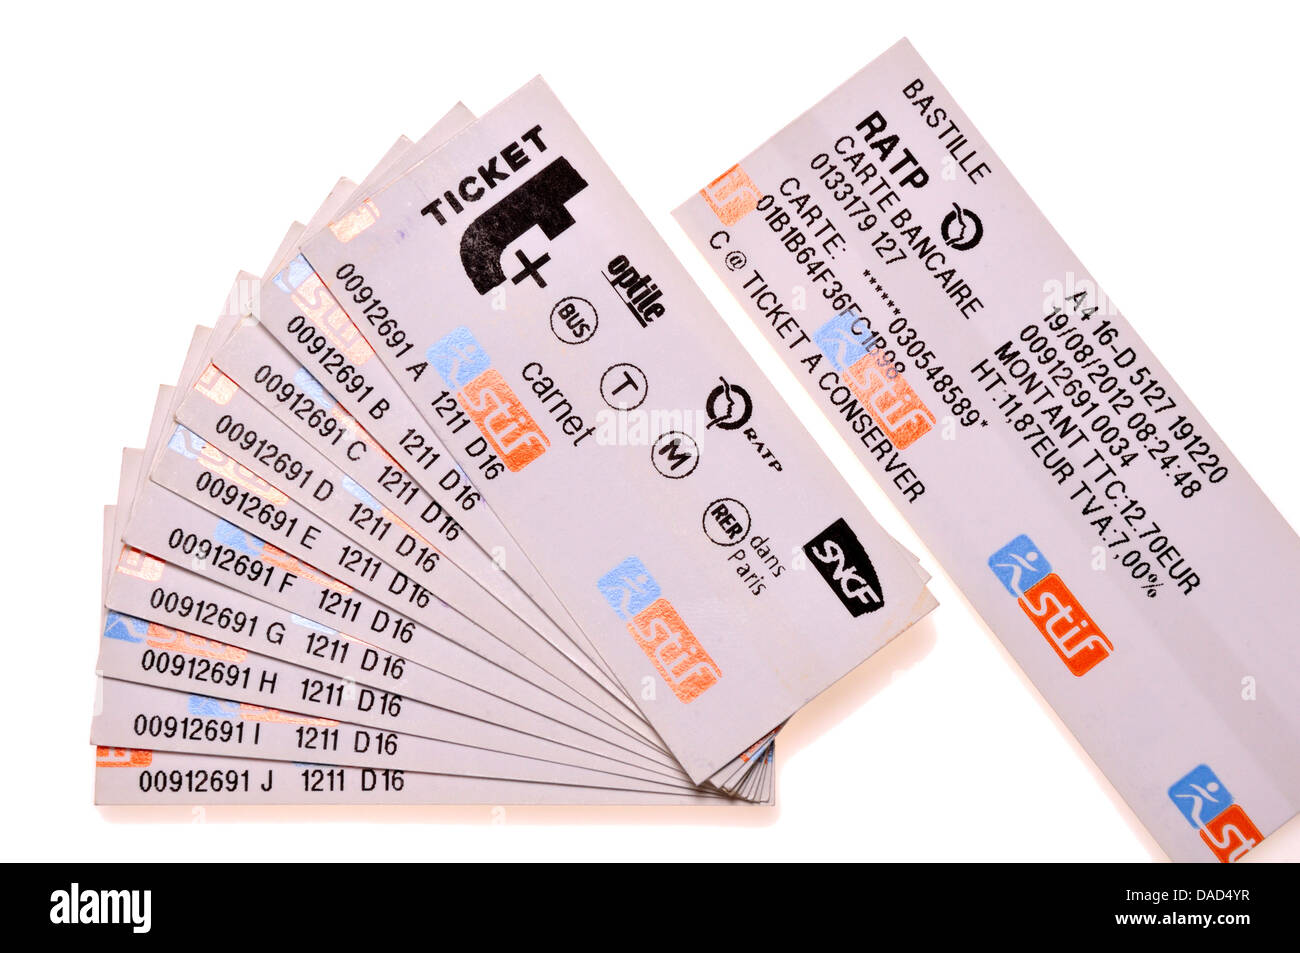 Paris metro tickets. A 'carnet' - 10 tickets bought together at discount  Stock Photo - Alamy